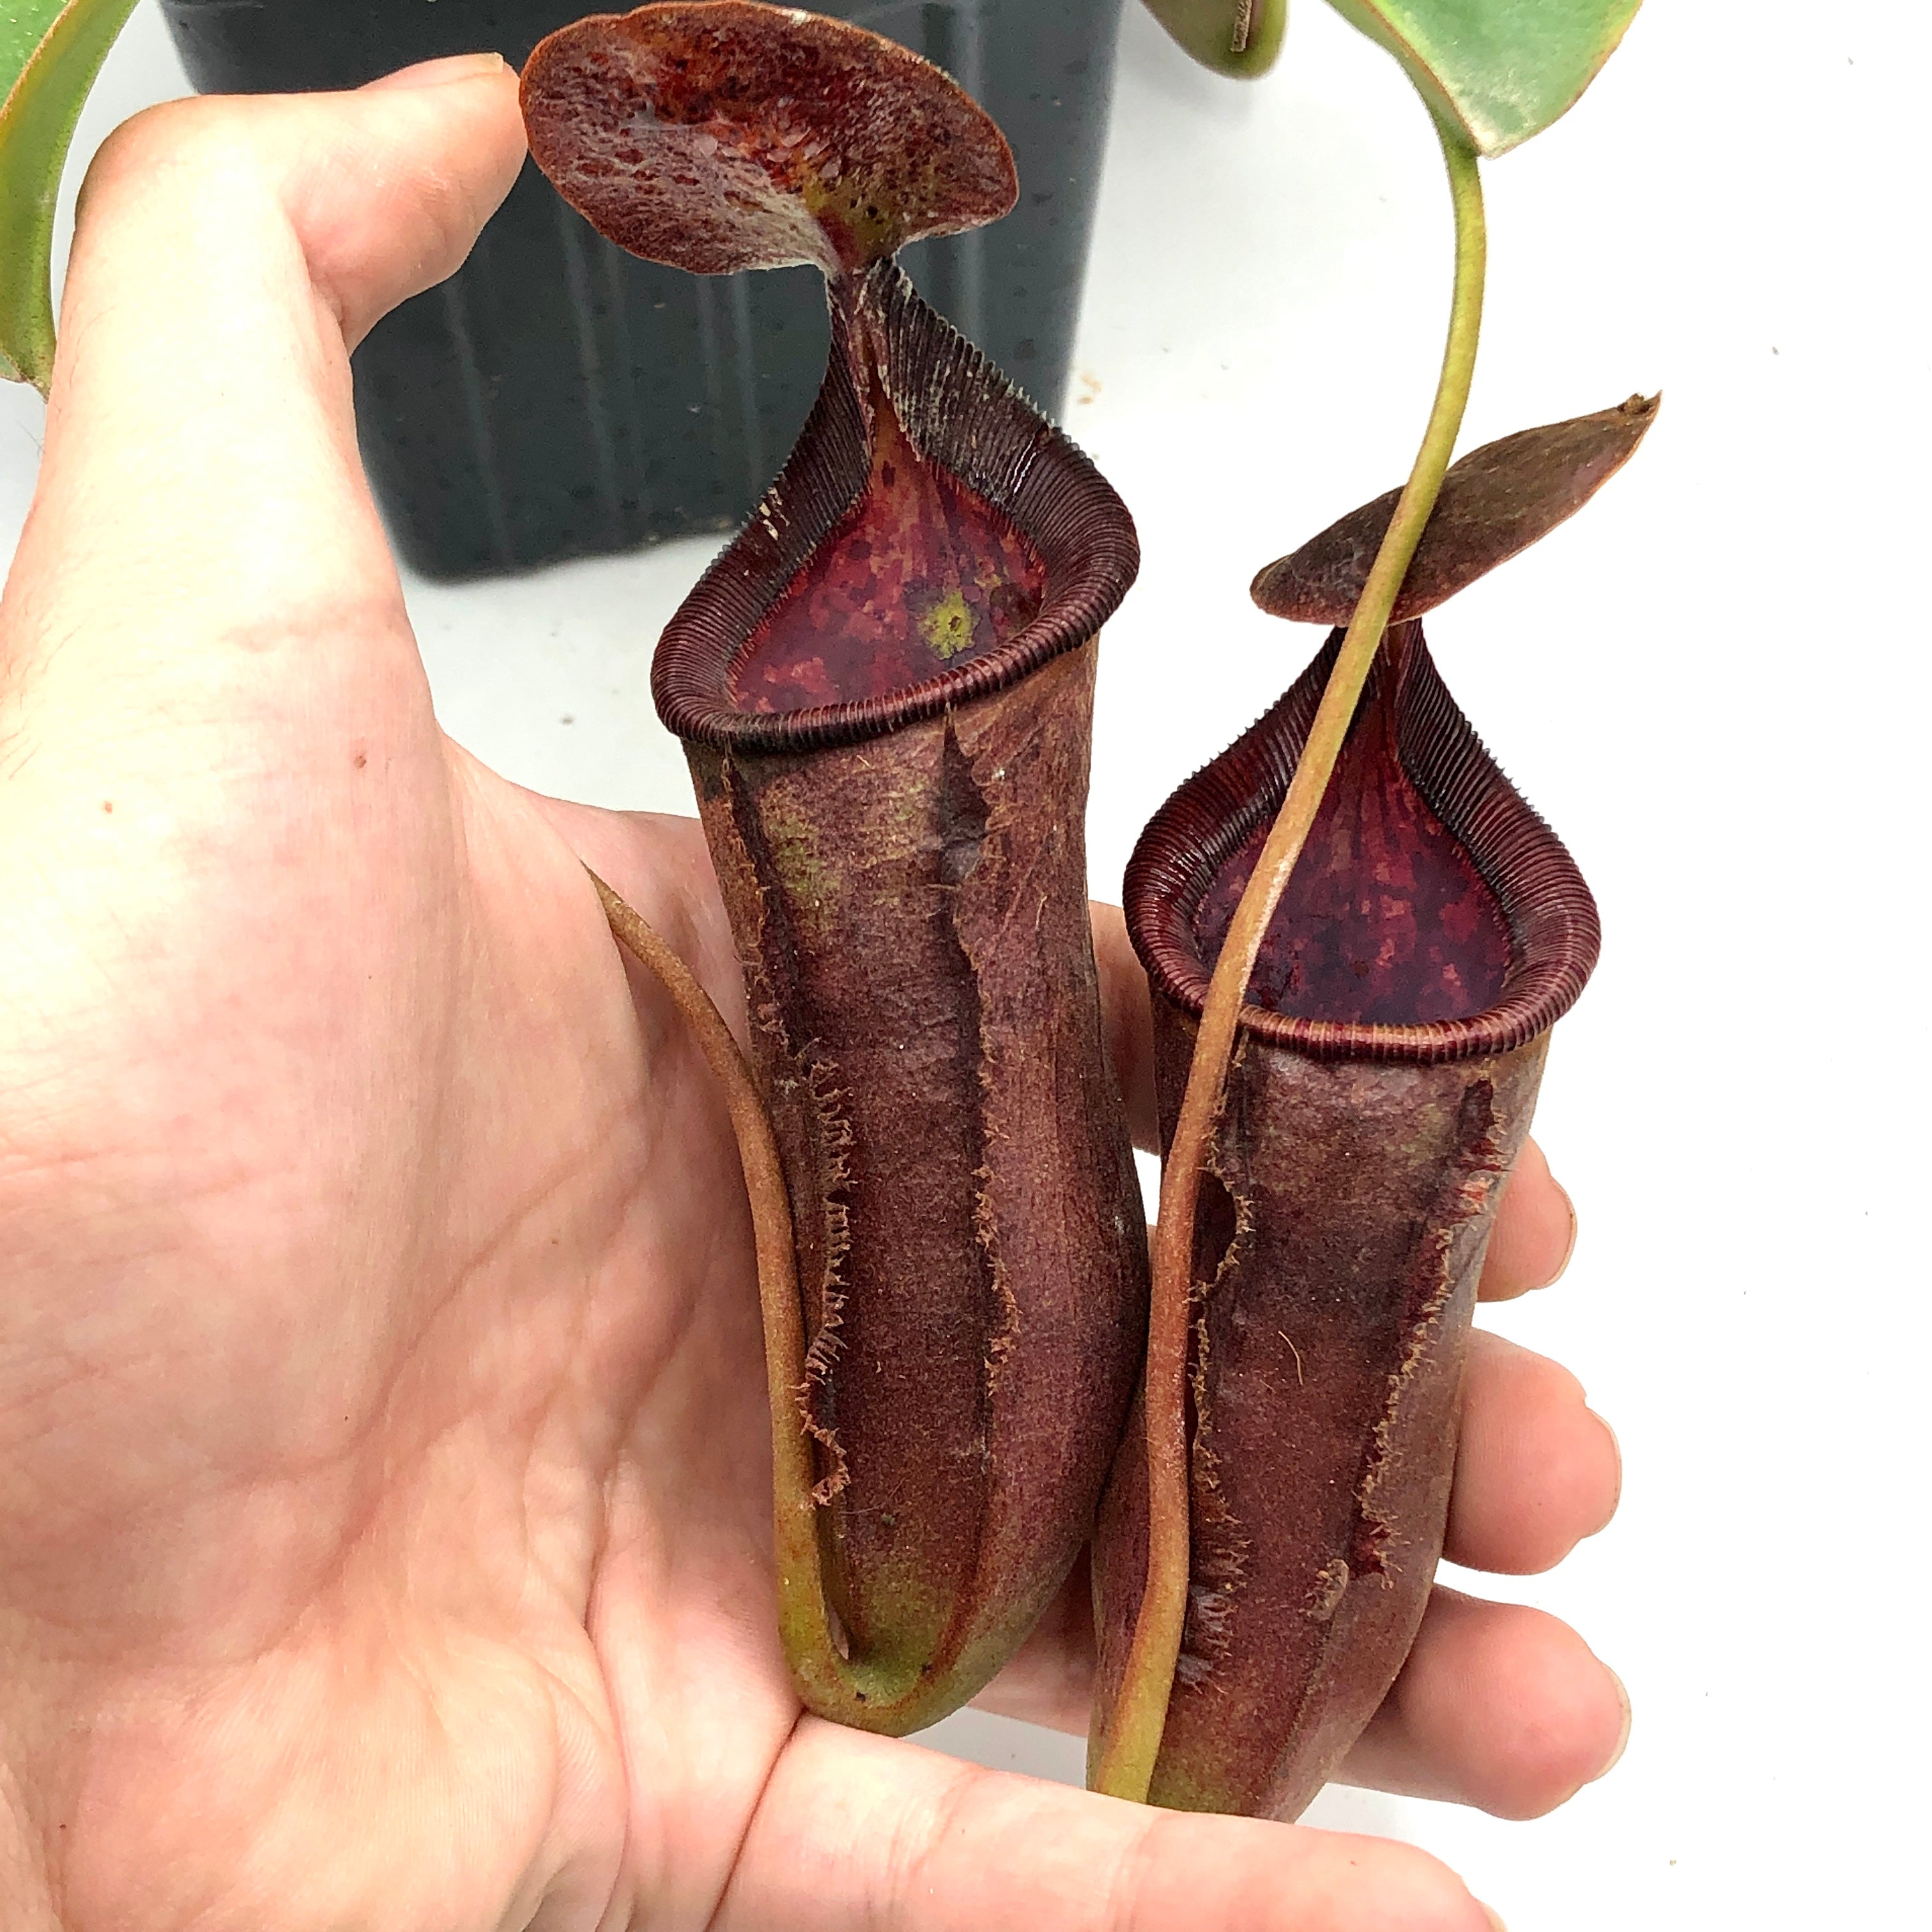 Nepenthes lowii x campanulata Male